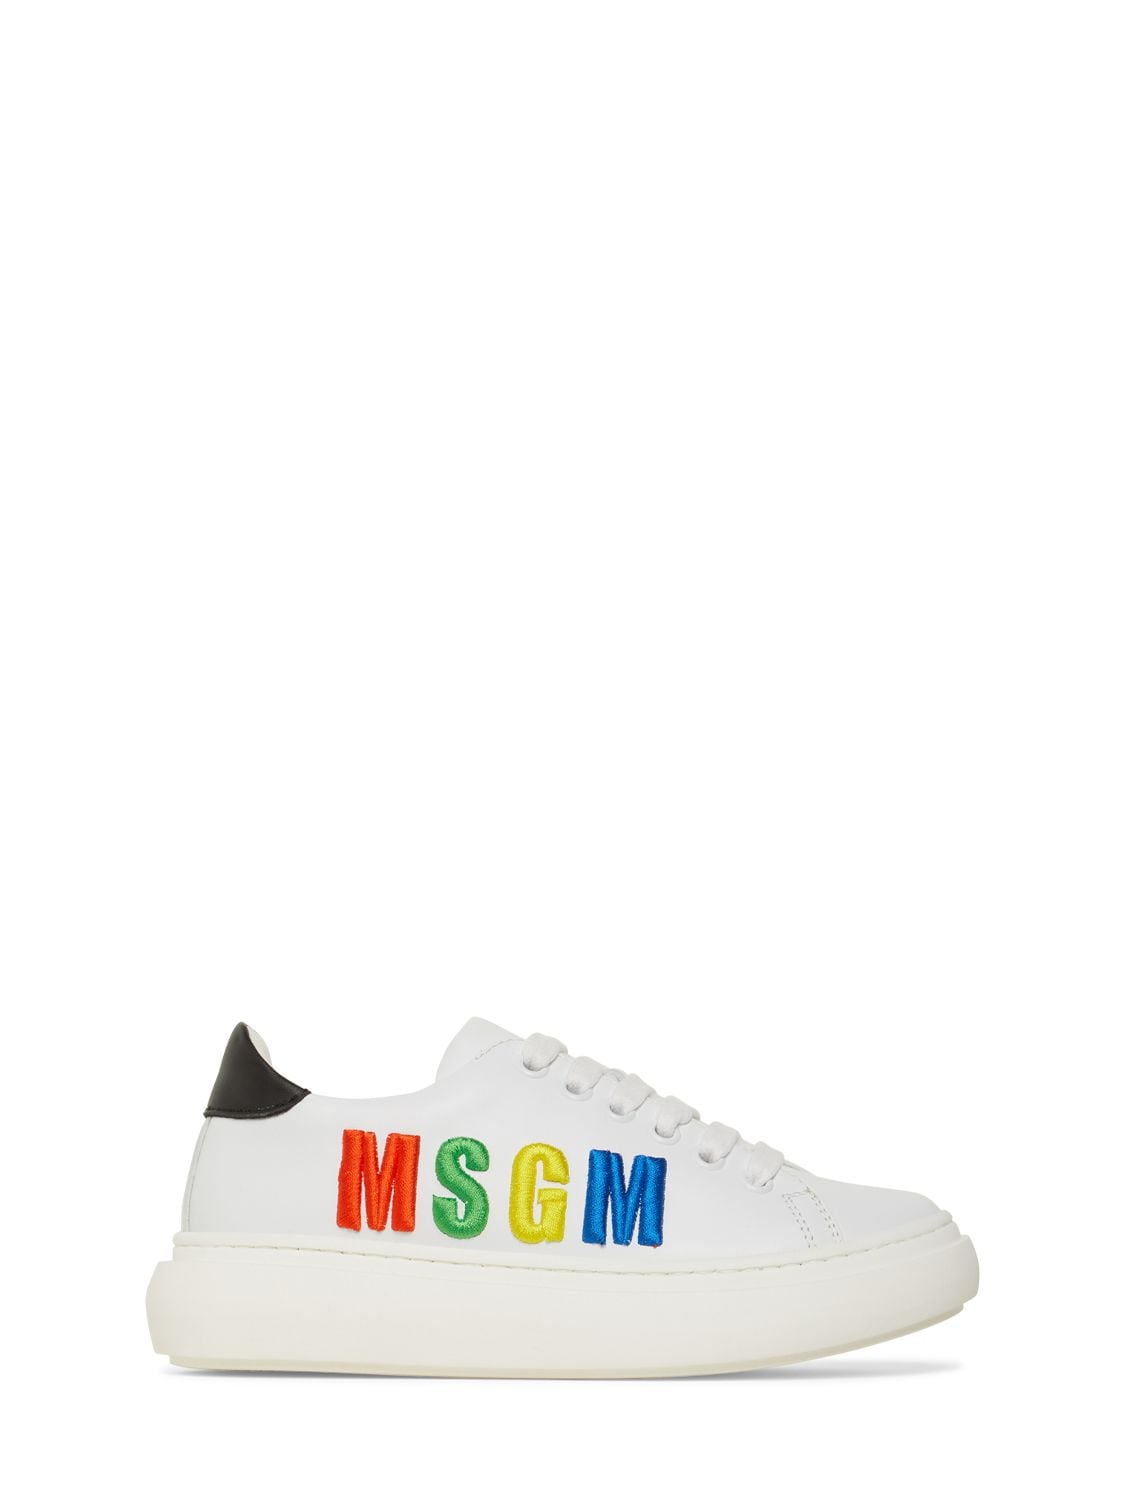 MSGM EMBROIDERED LOGO LEATHER SNEAKERS